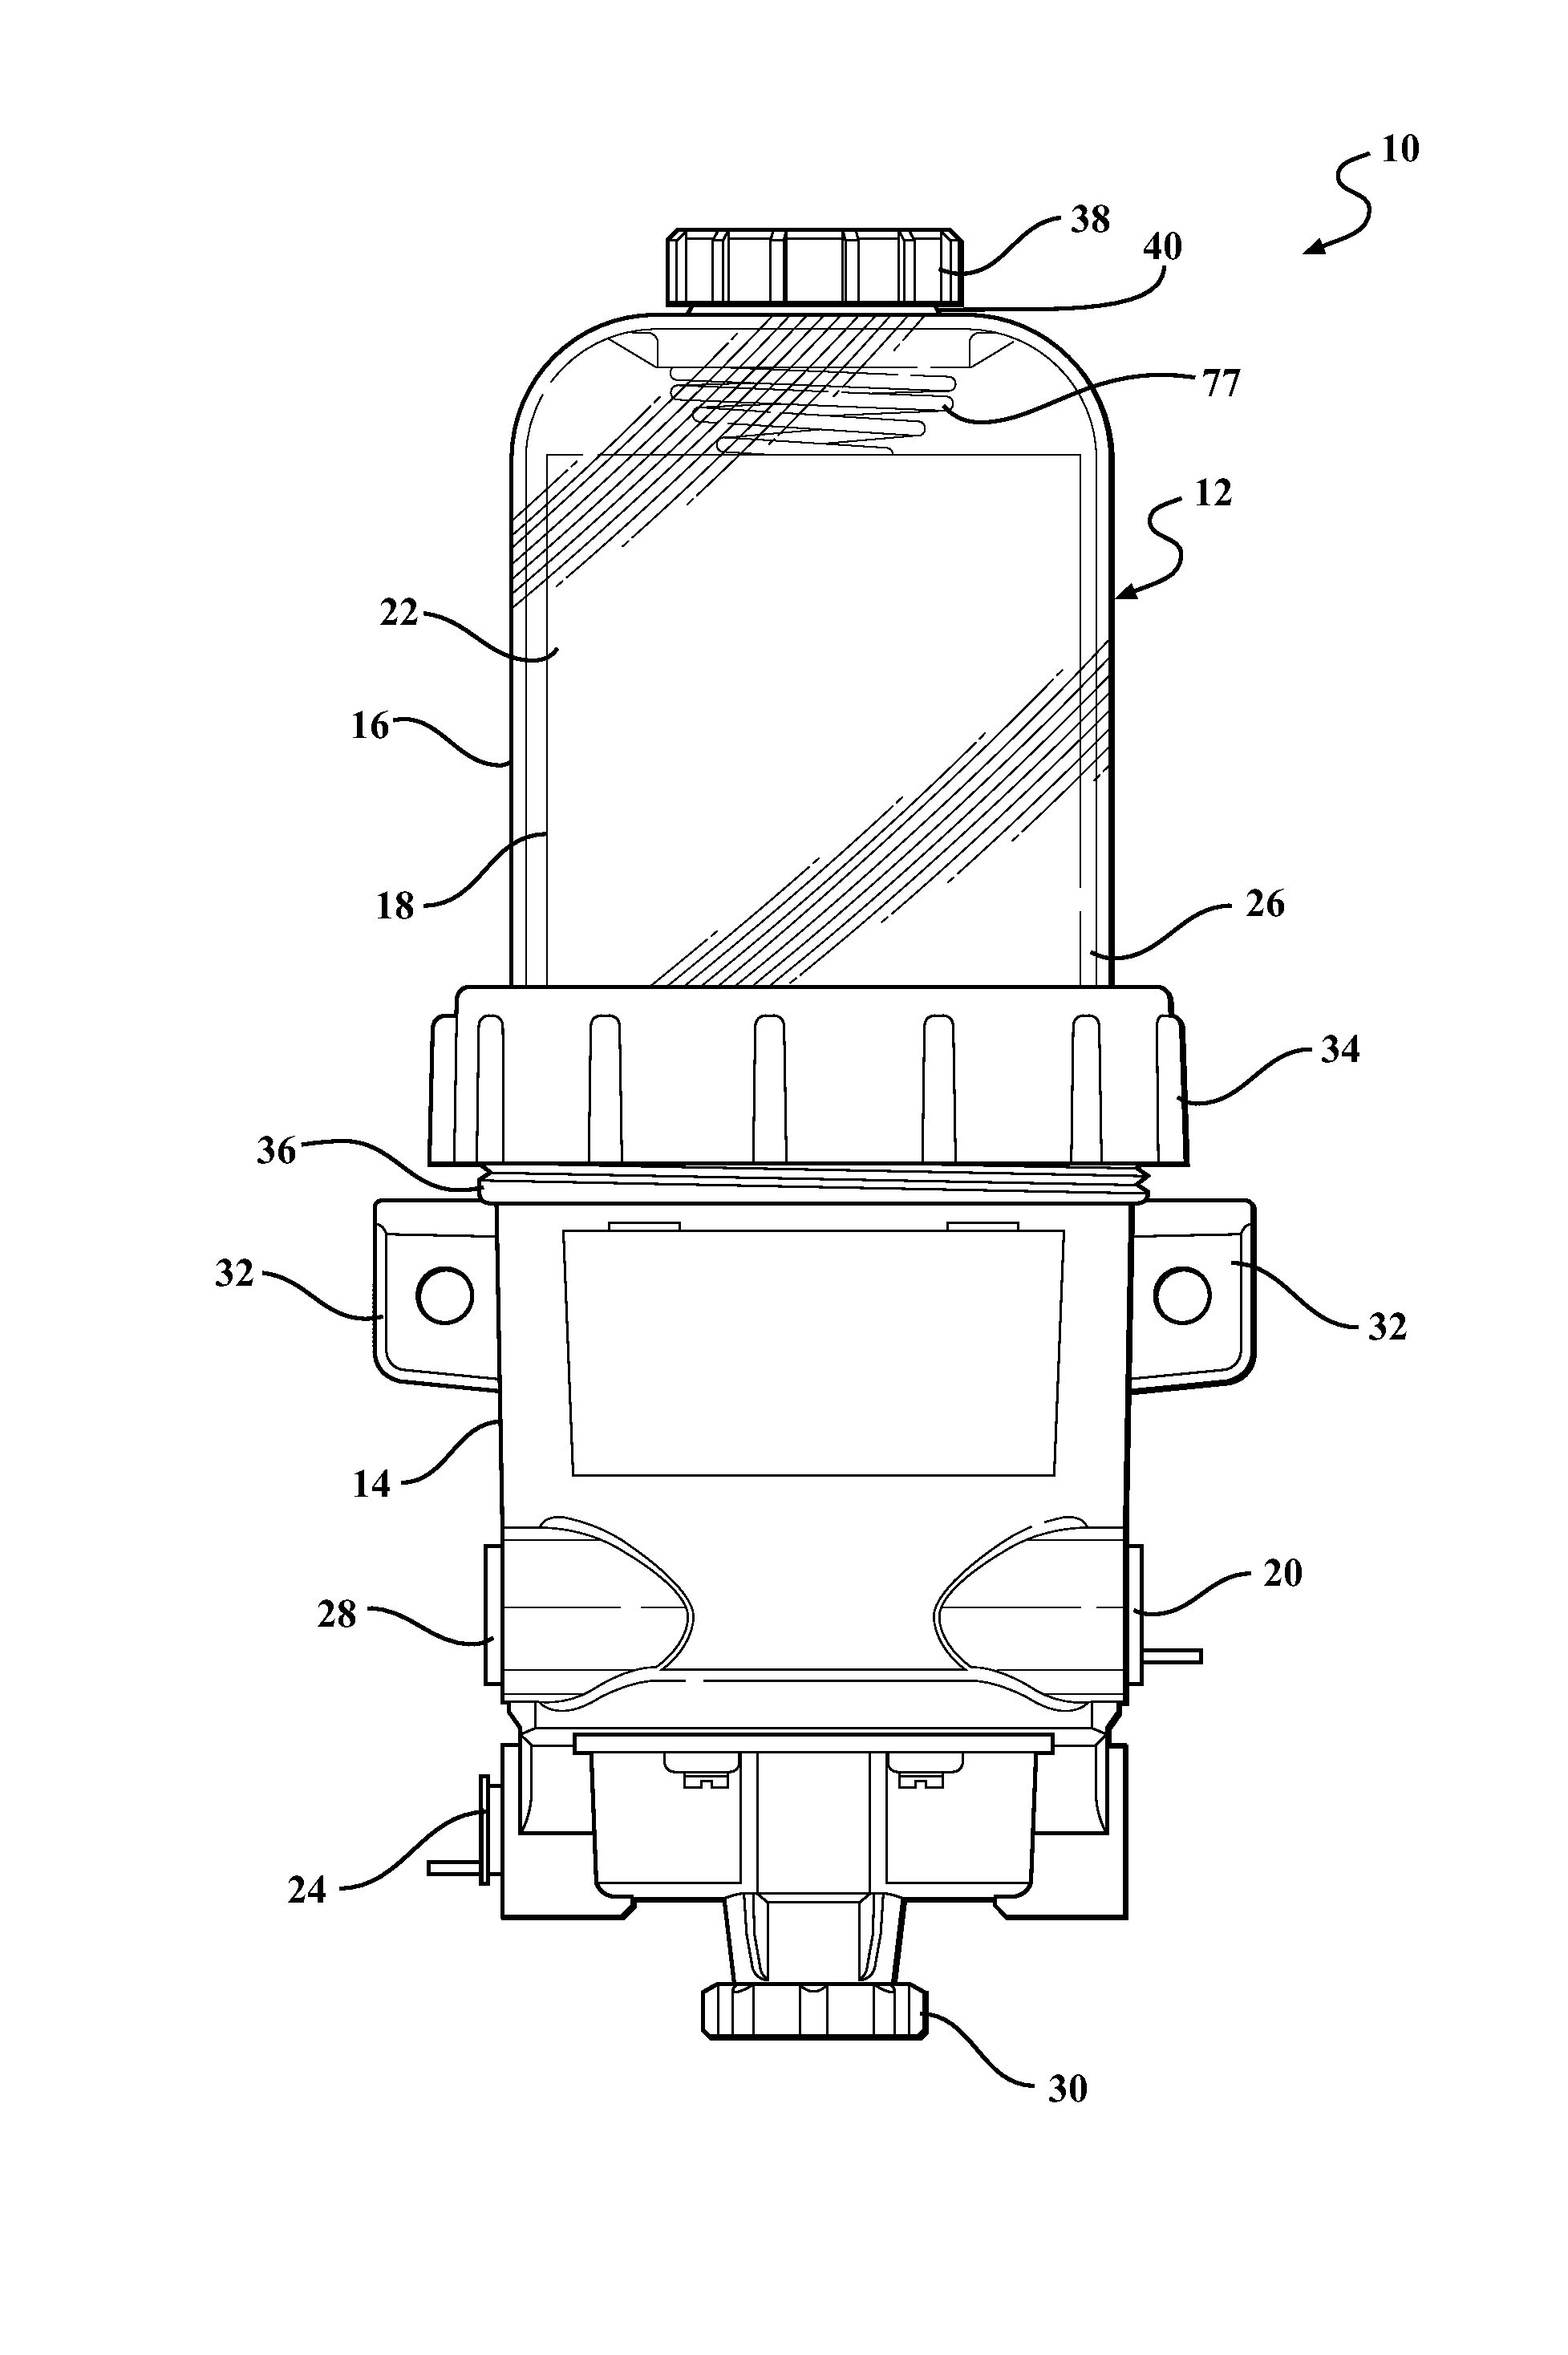 Fluid filter assembly with a filter cartridge and housing interface